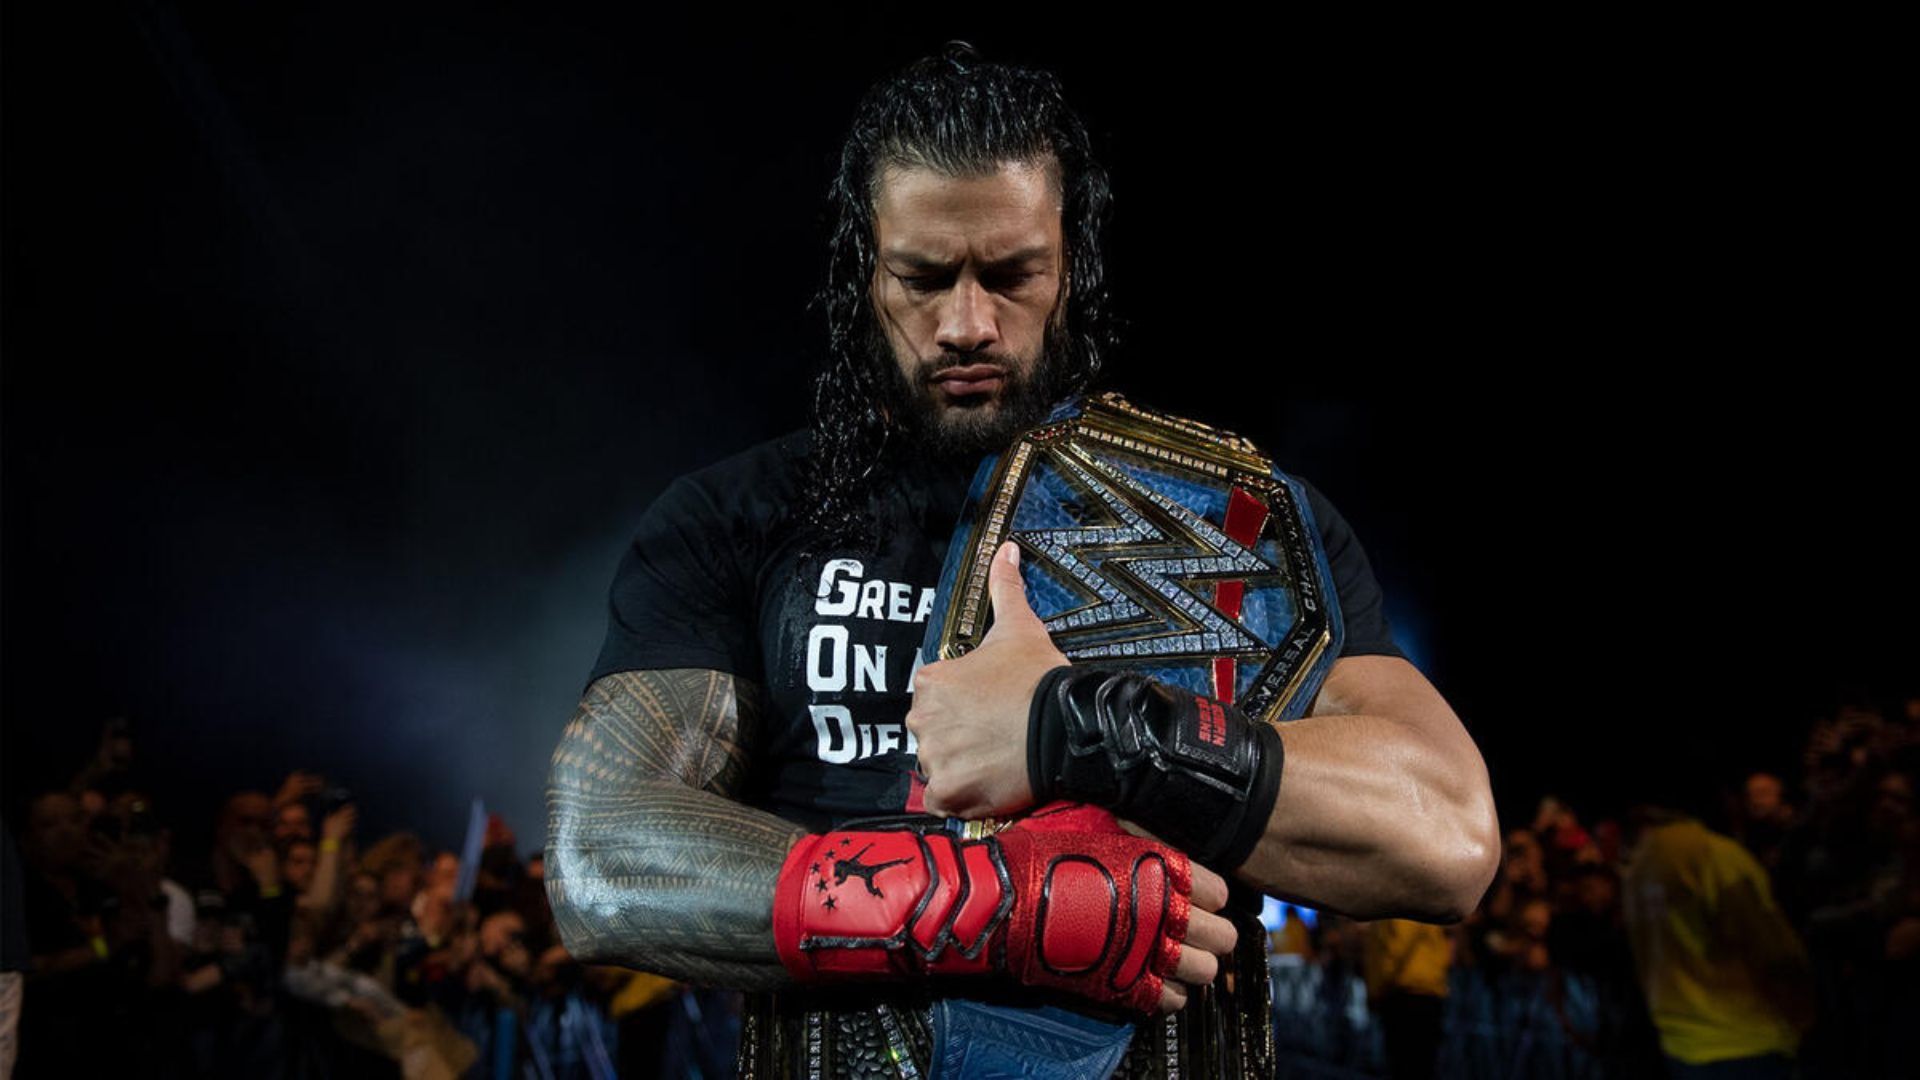 Roman Reigns is the Undisputed Universal Champion